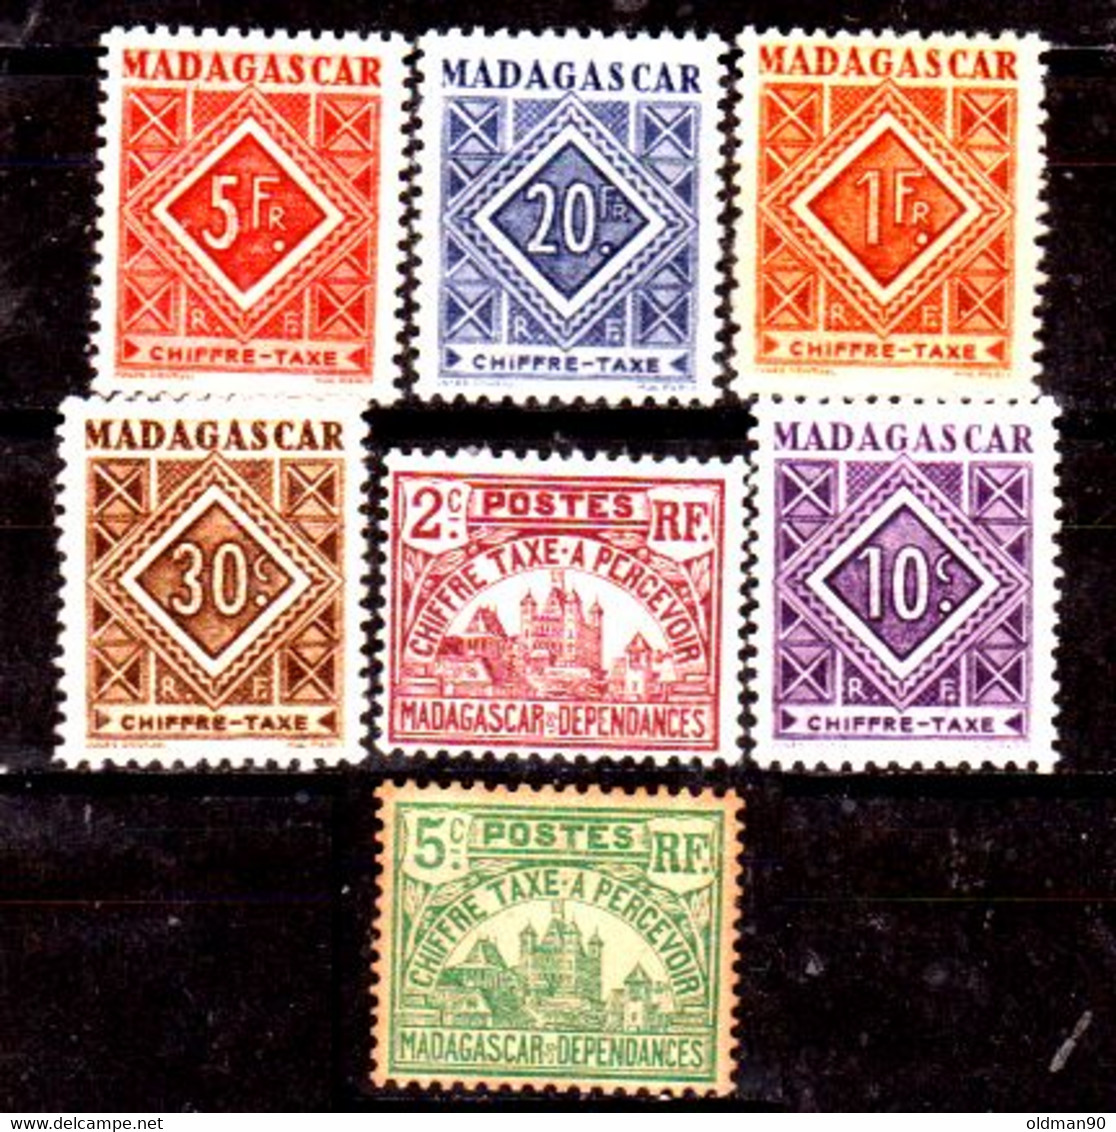 Madagascar -137- POSTAGE DUE STAMPS, Issued By 1908-1962 - Quality In Your Opinion. - Strafport